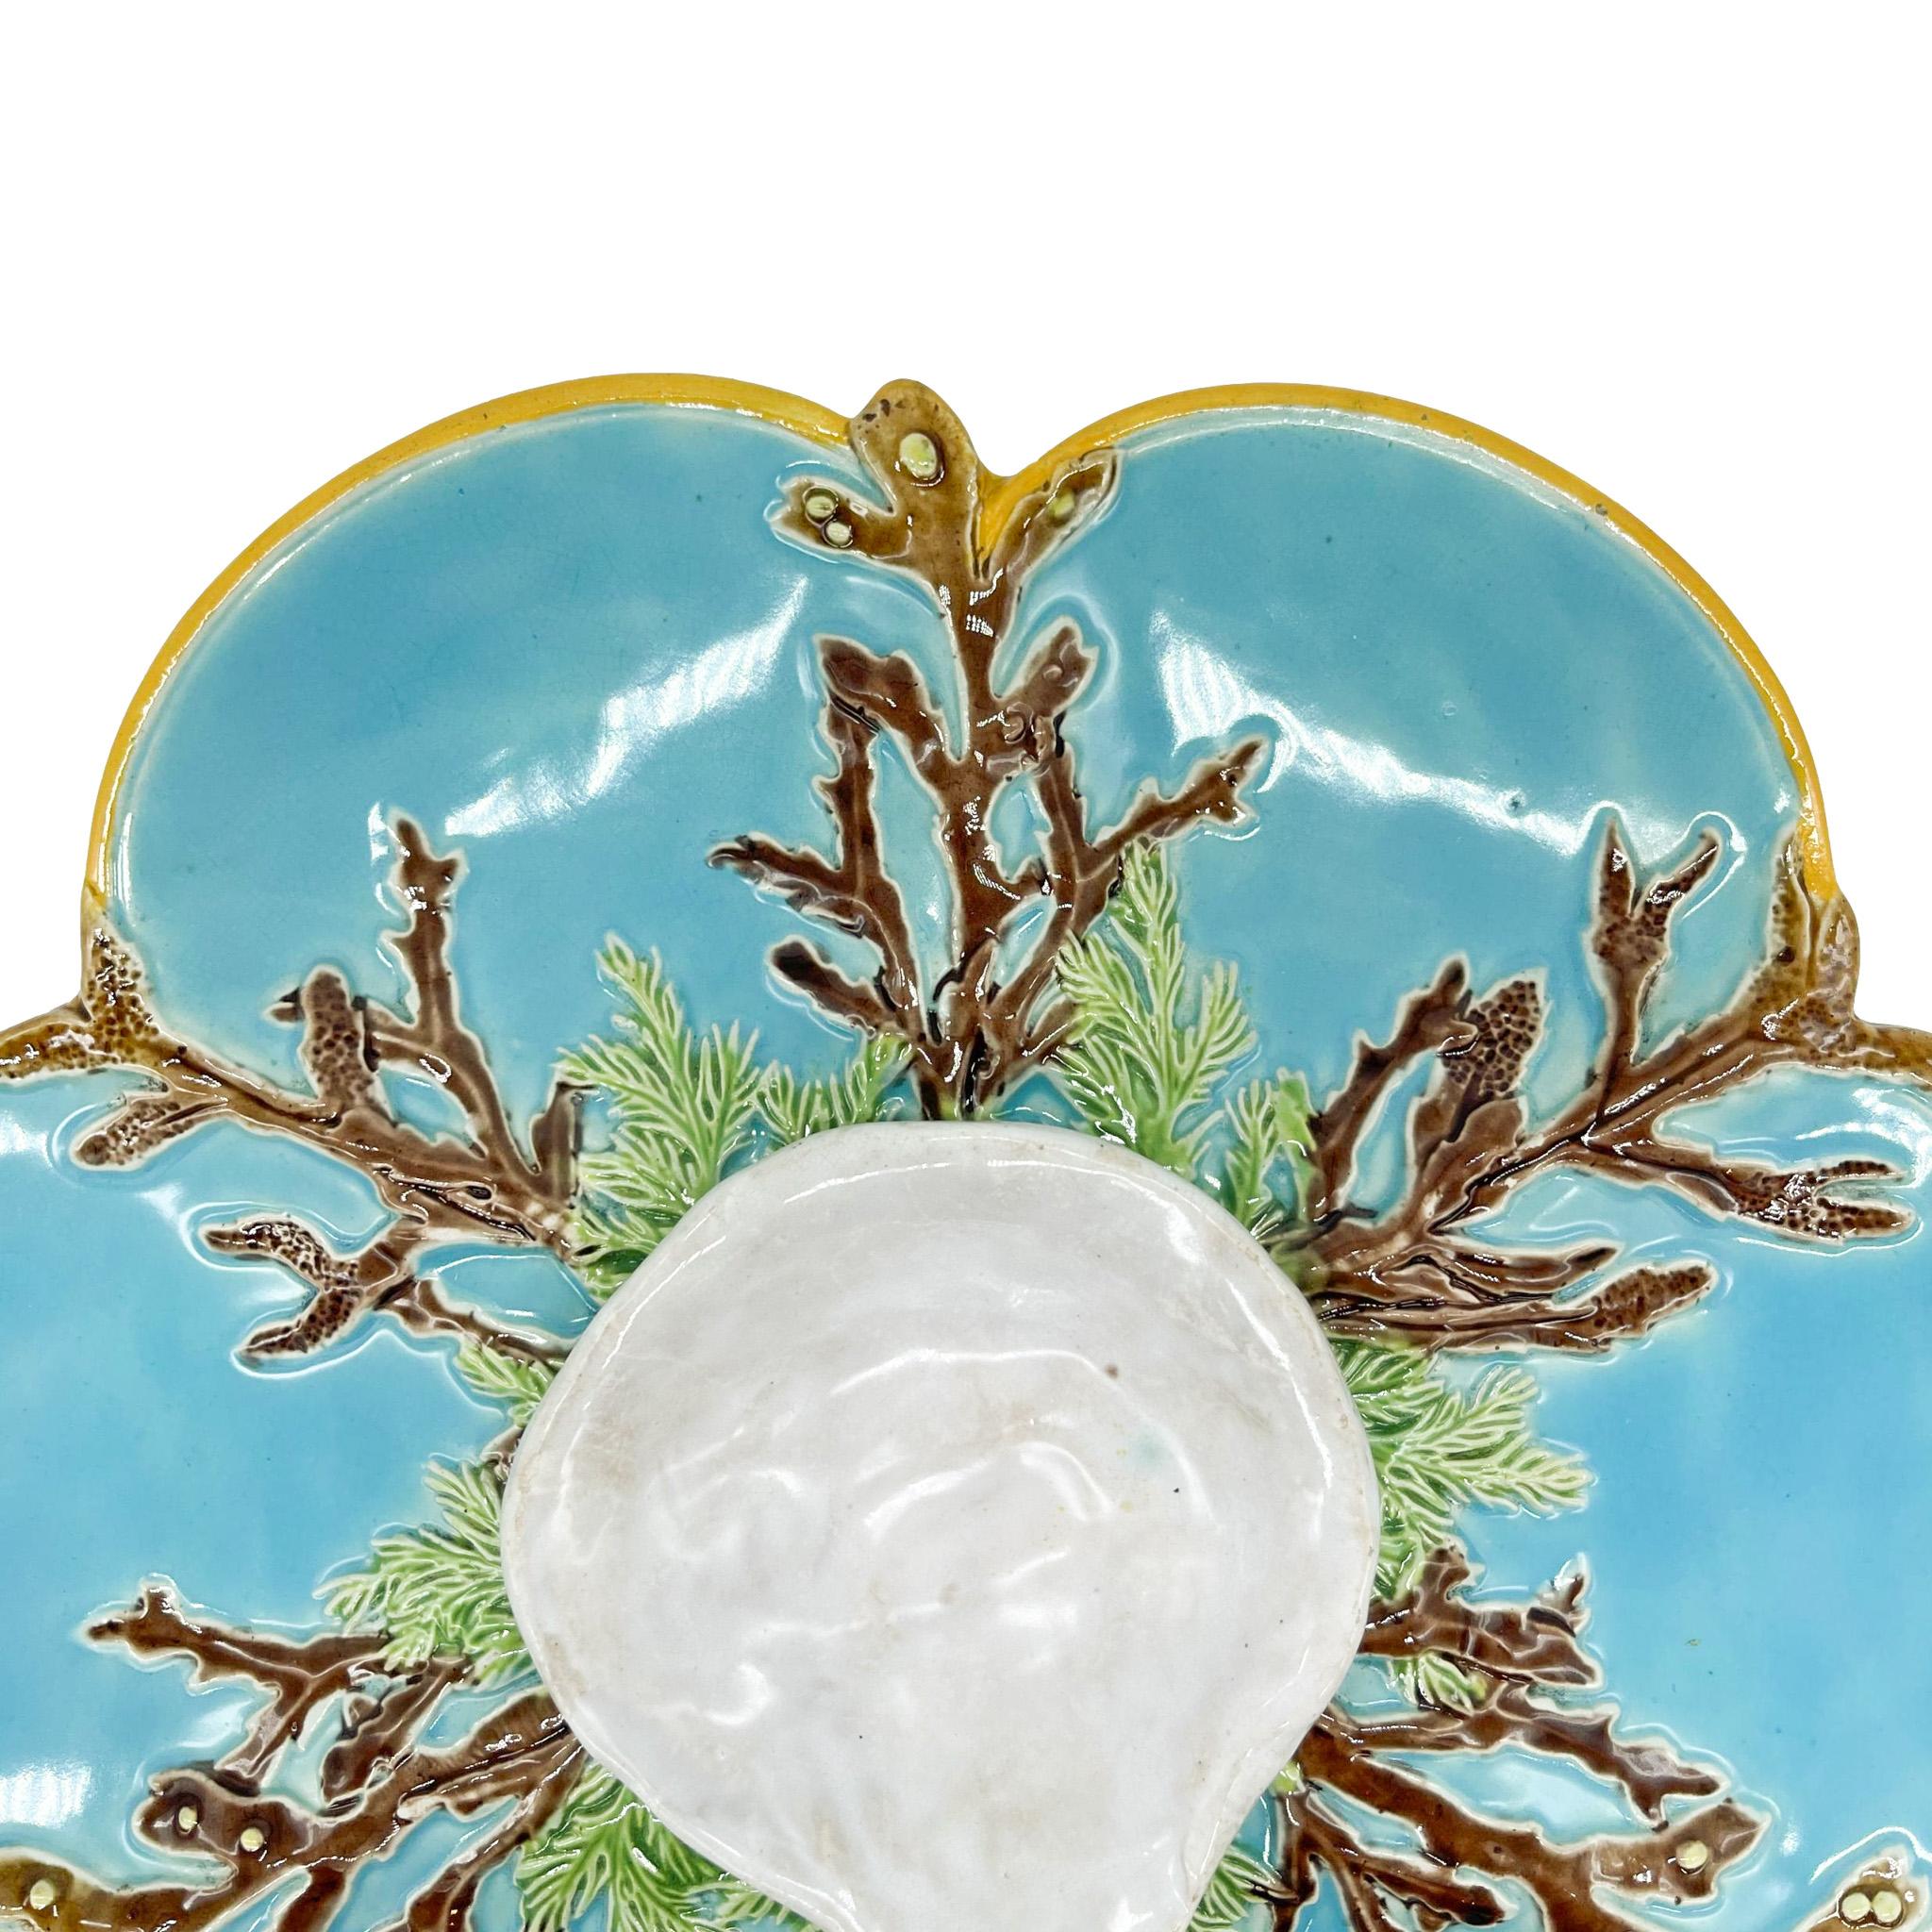 George Jones Majolica Oyster Plate on a Turquoise Ground, English, ca, 1874 1